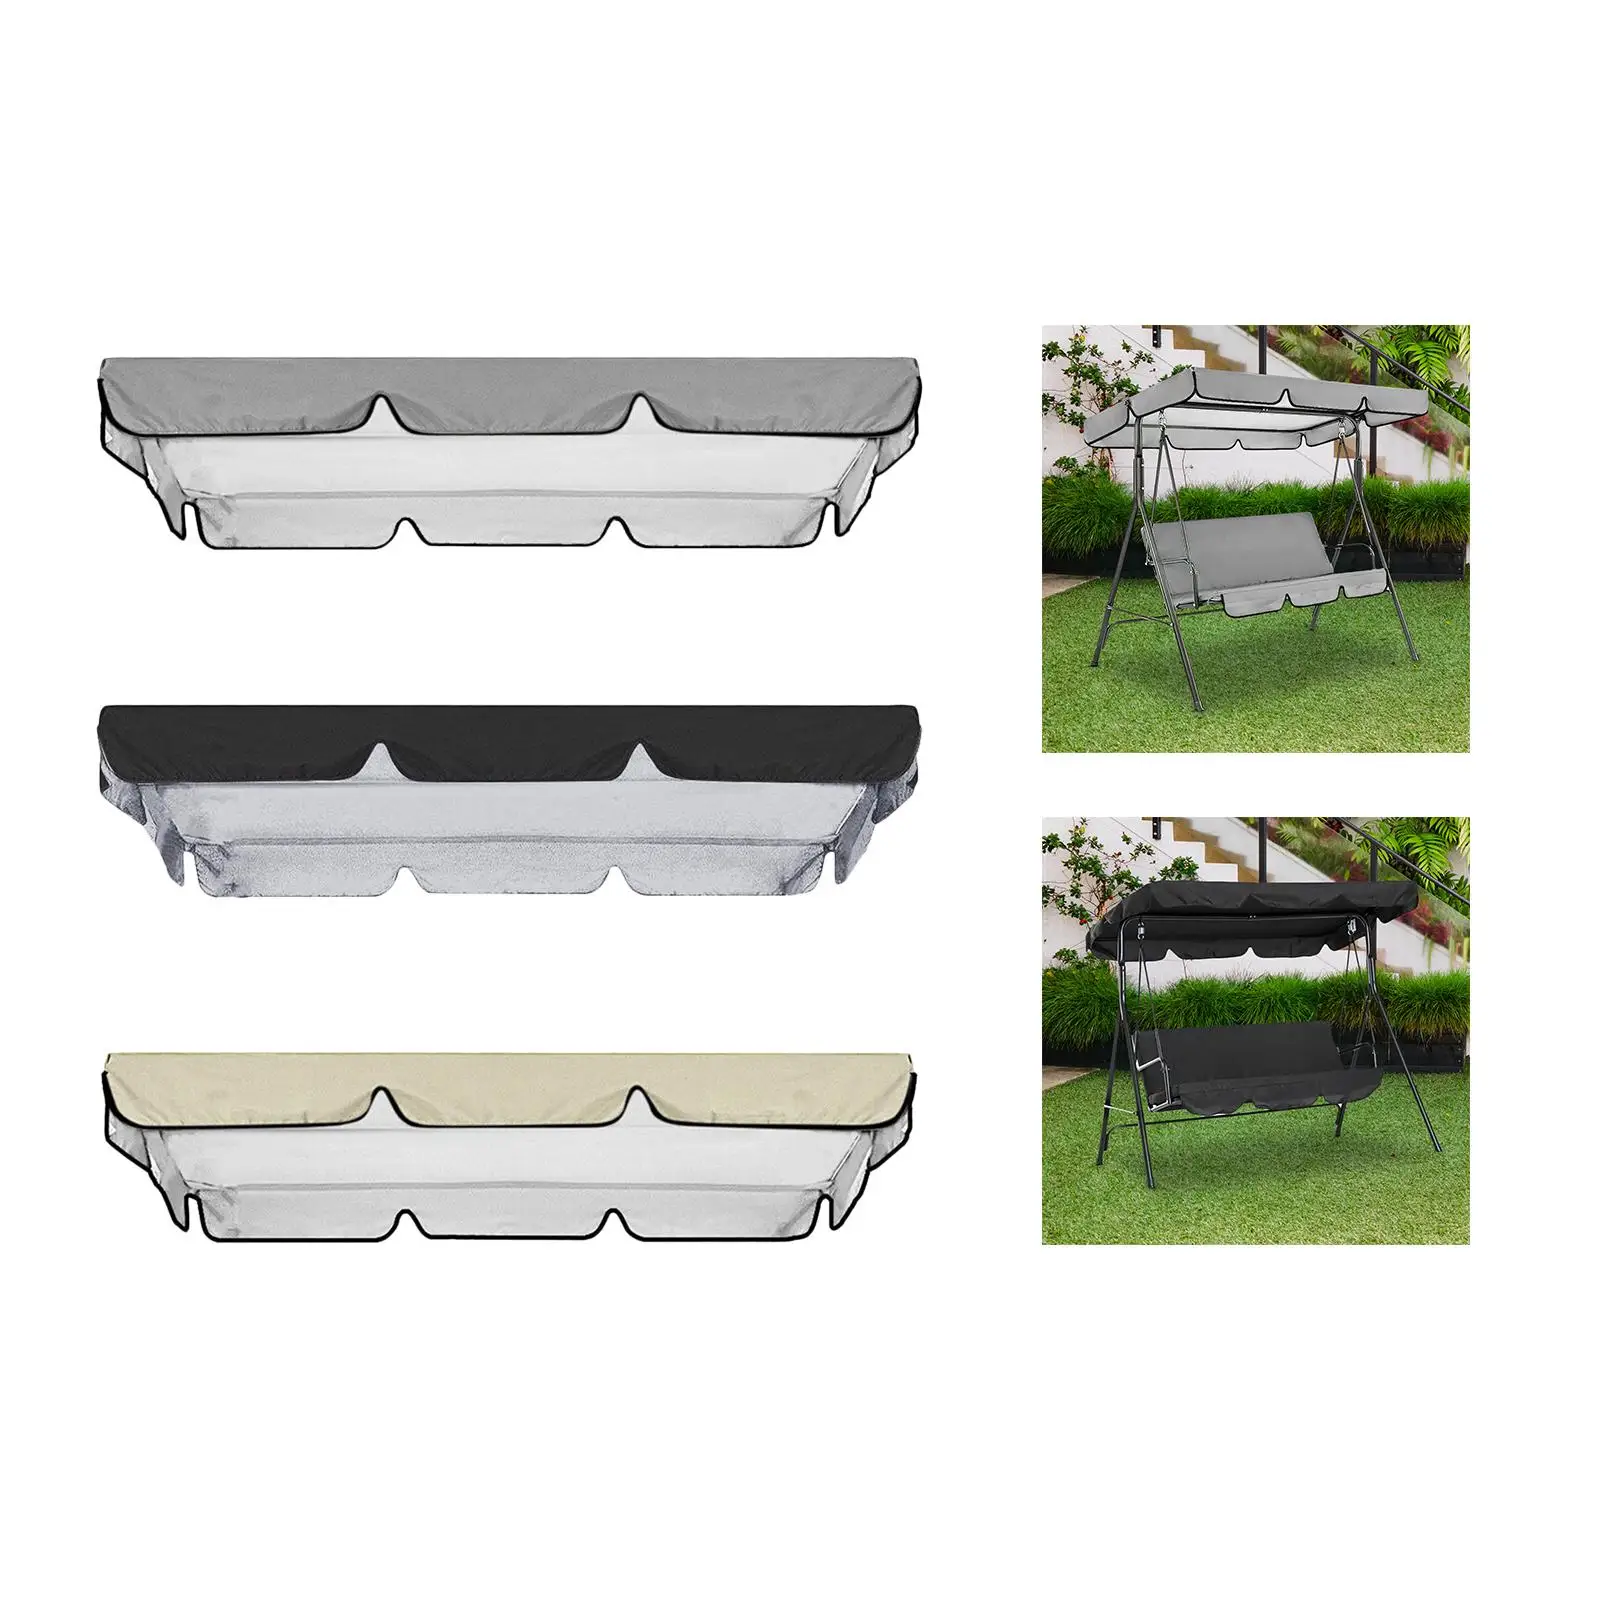 Swing Canopy Replacement Cover Spare Cover Sun Shade Oxford Cloth Swing Top Cover for Garden Patio Bench Seat Yard Swing Chair